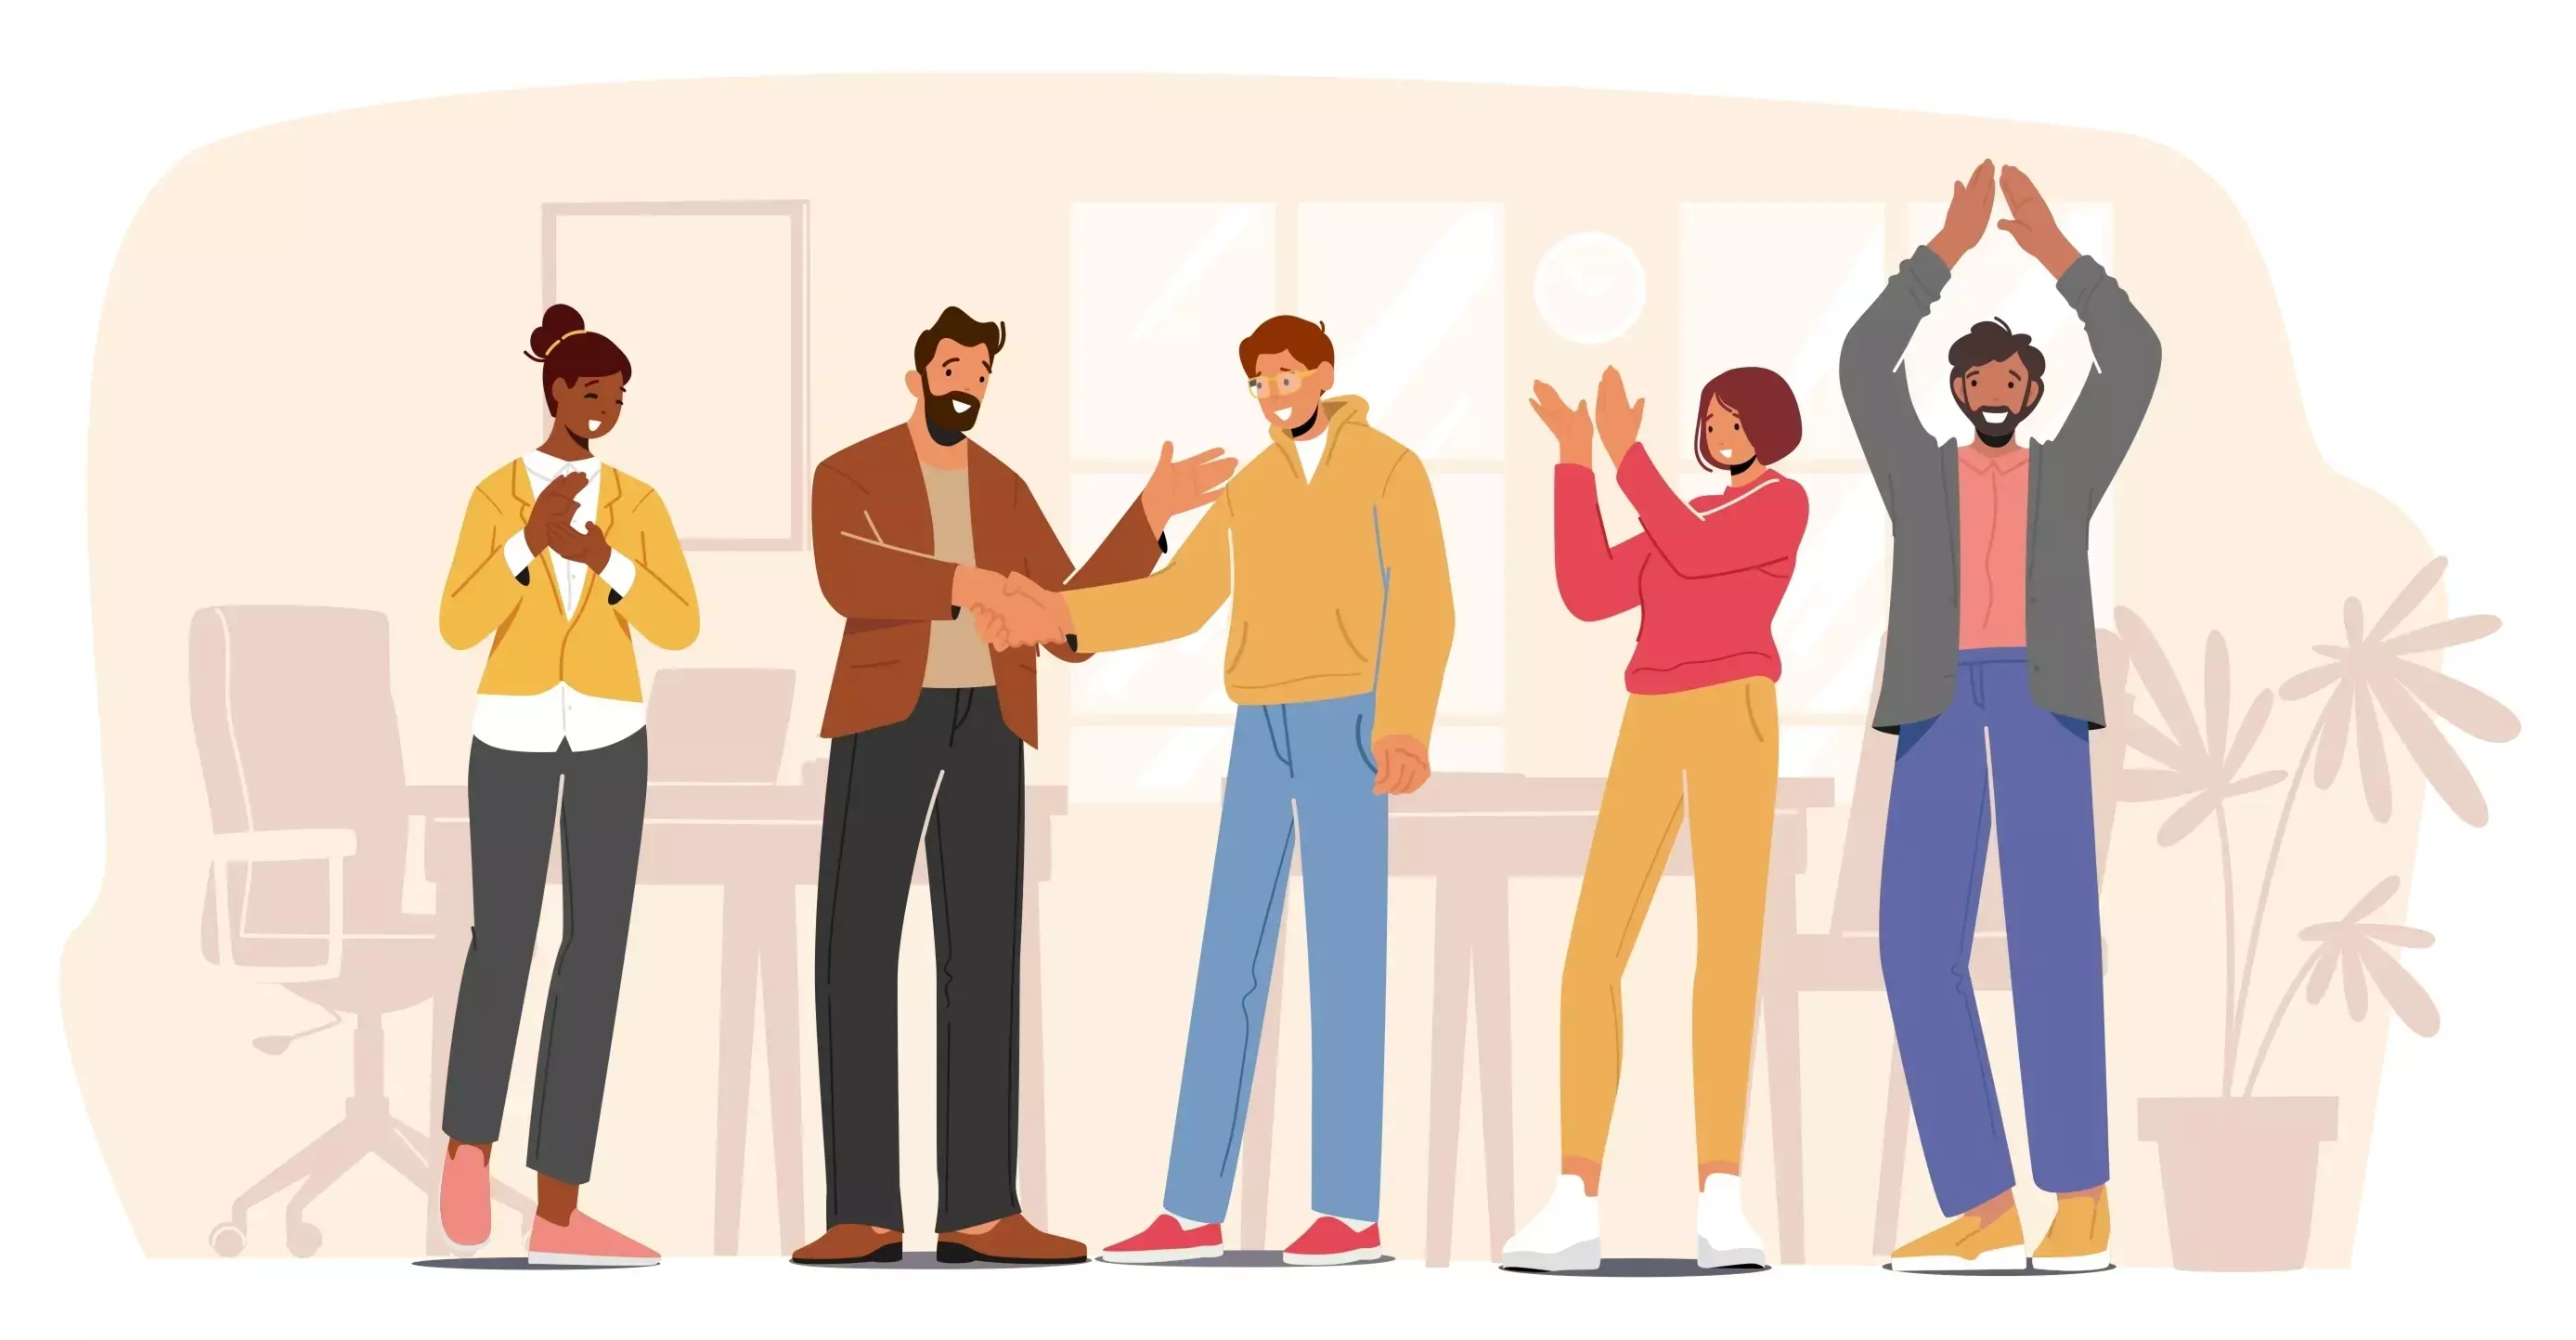 Animated people welcoming someone into a team, smiling, clapping and shaking hands